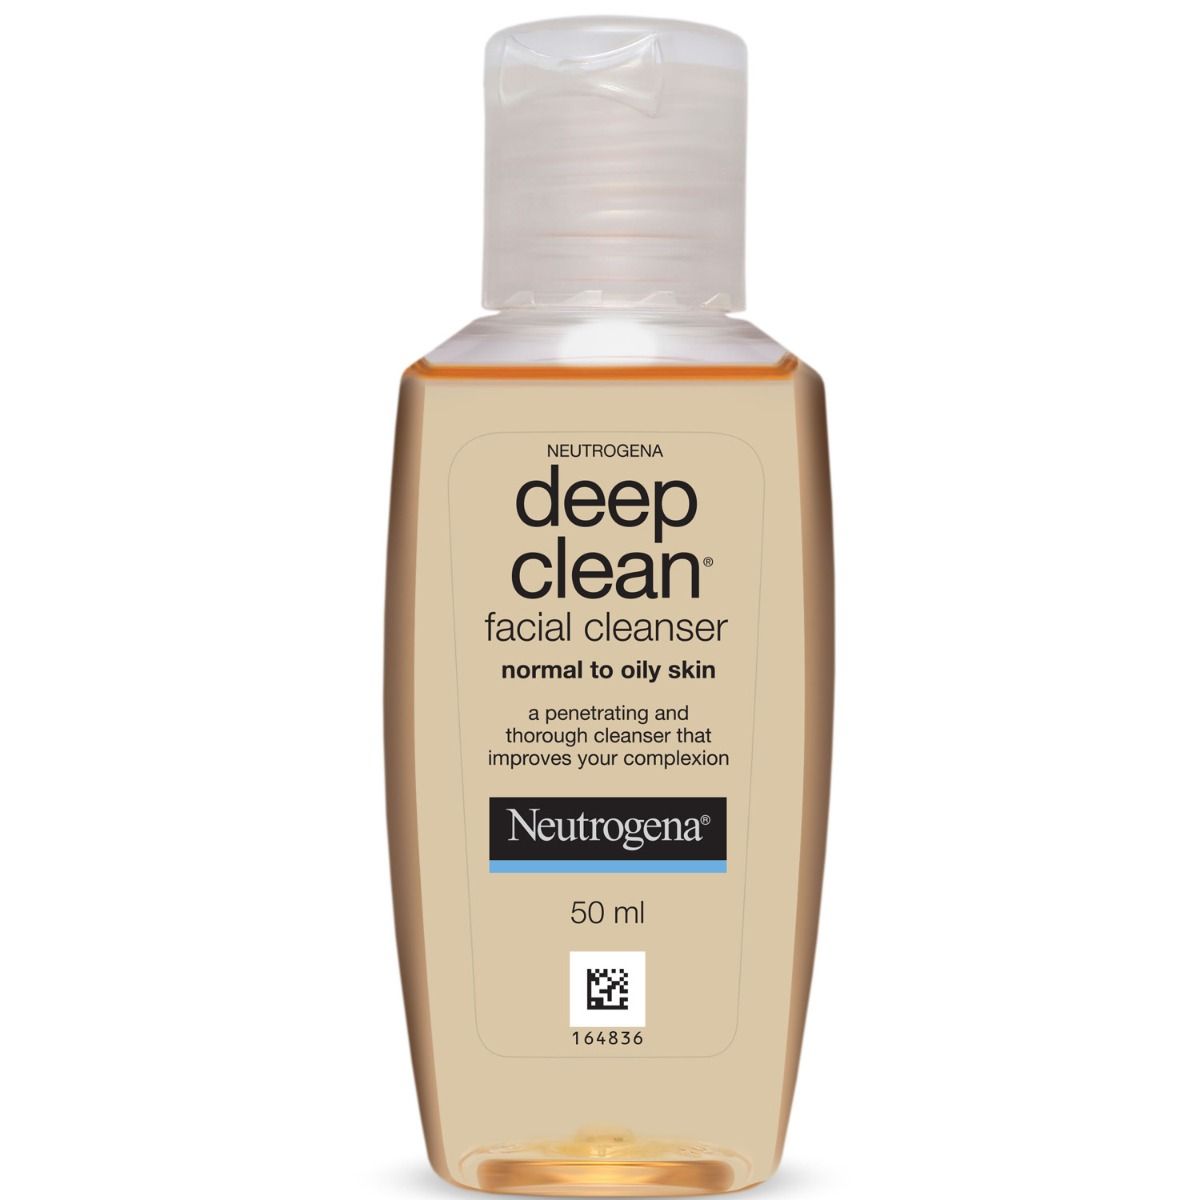 Buy Neutrogena Deep Clean Facial Cleanser For Normal to Oily Skin, 50 ml Online